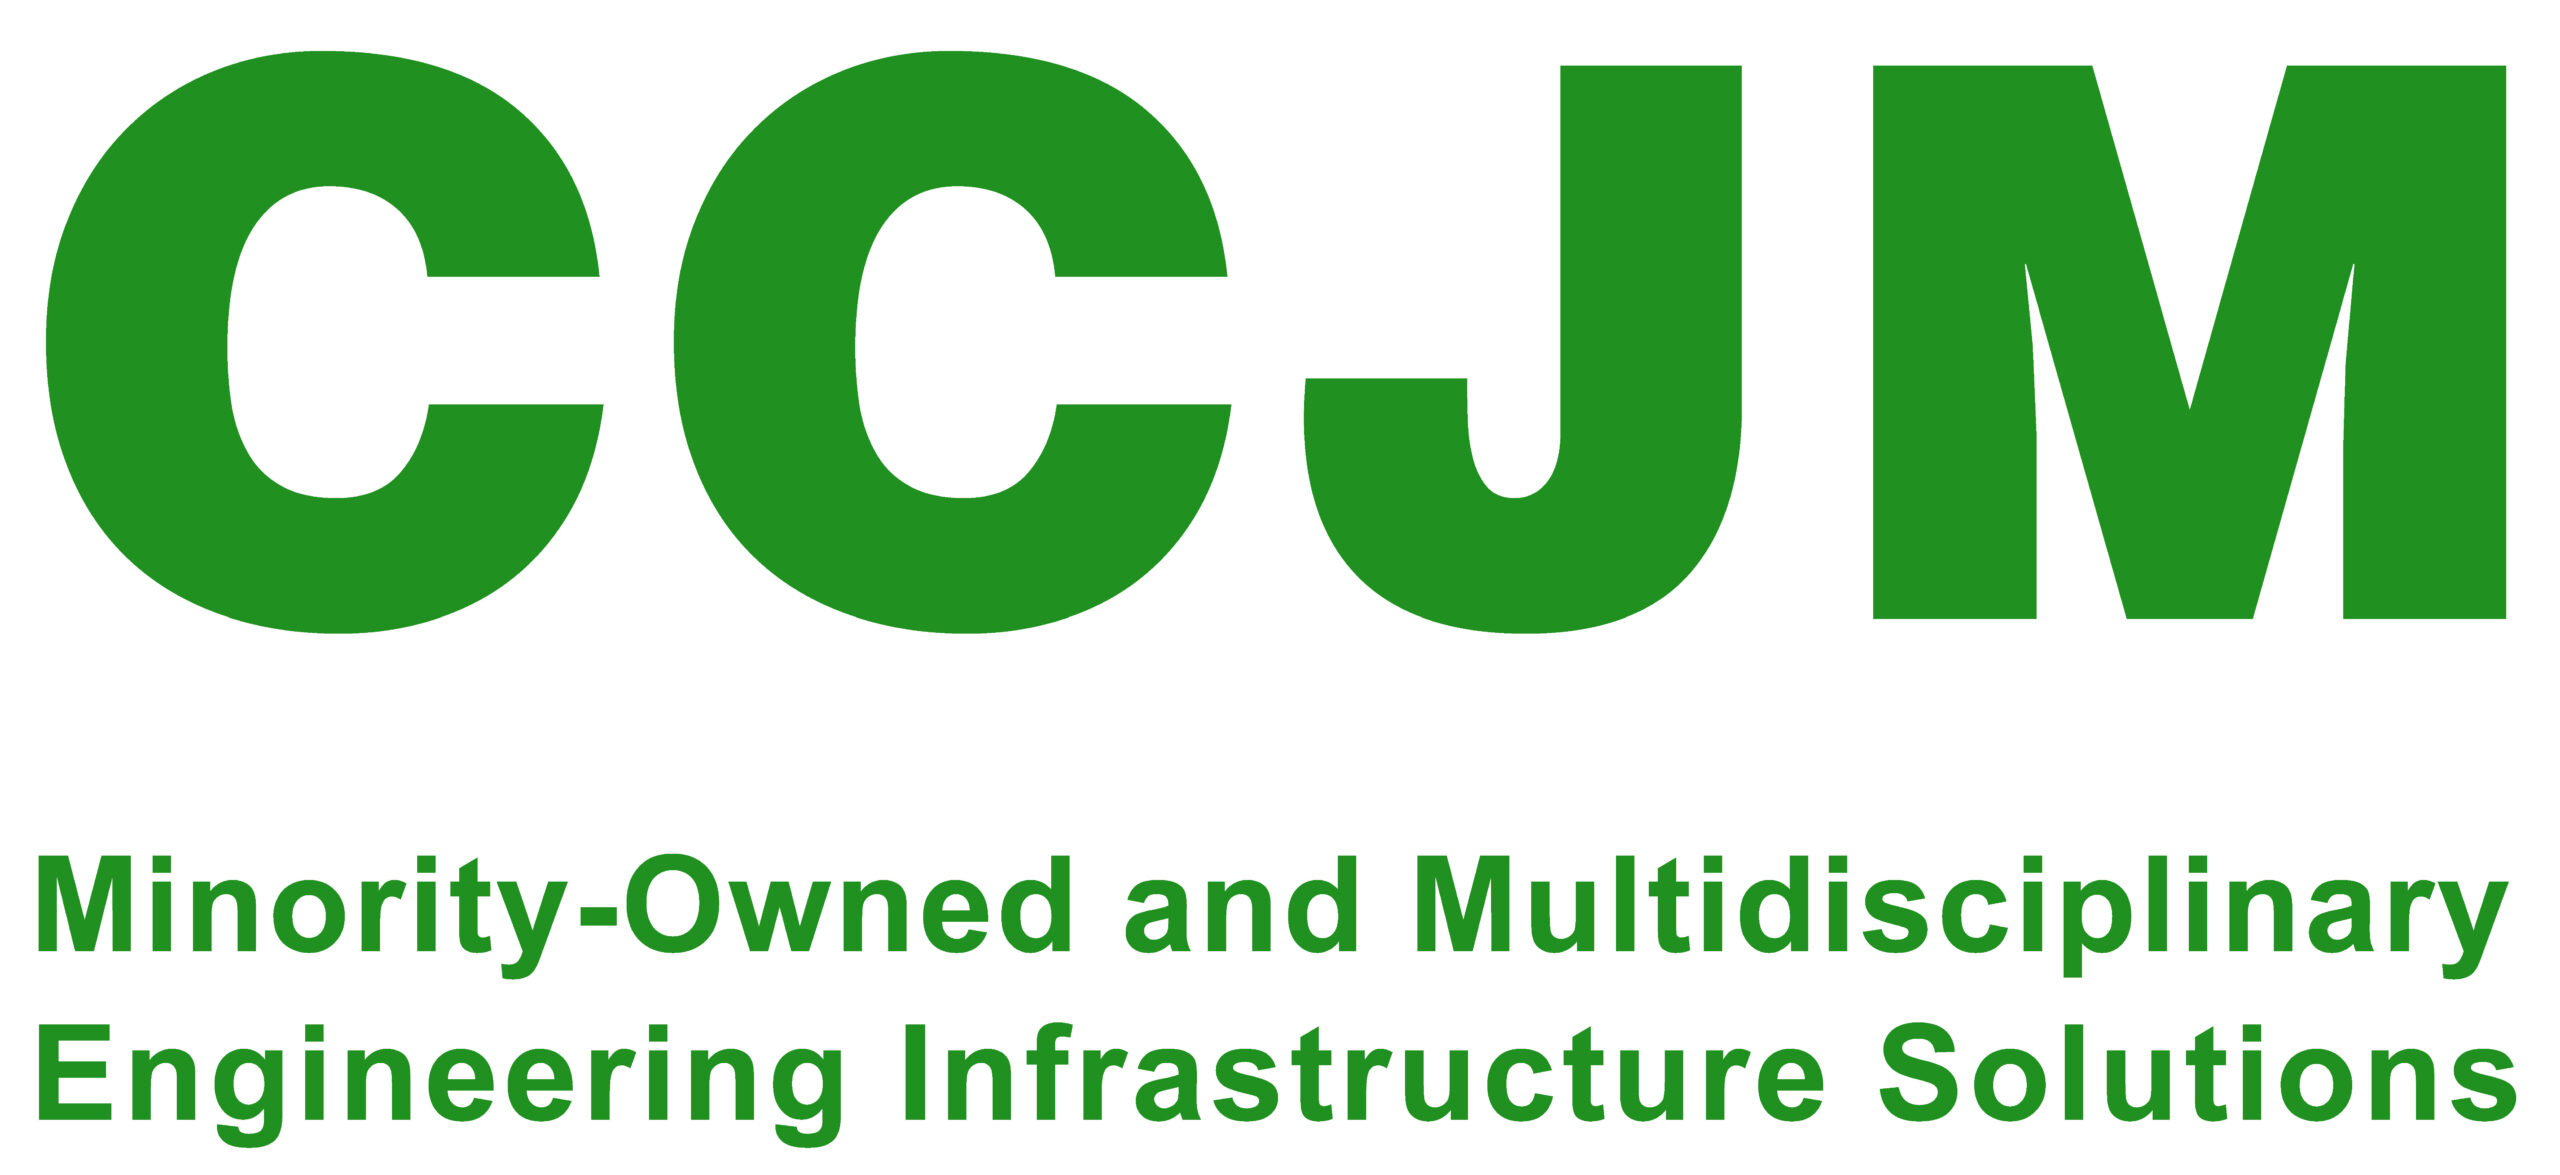 CCJM Minority-Owned and Multidisciplinary Engineering Infrastructure Solutions